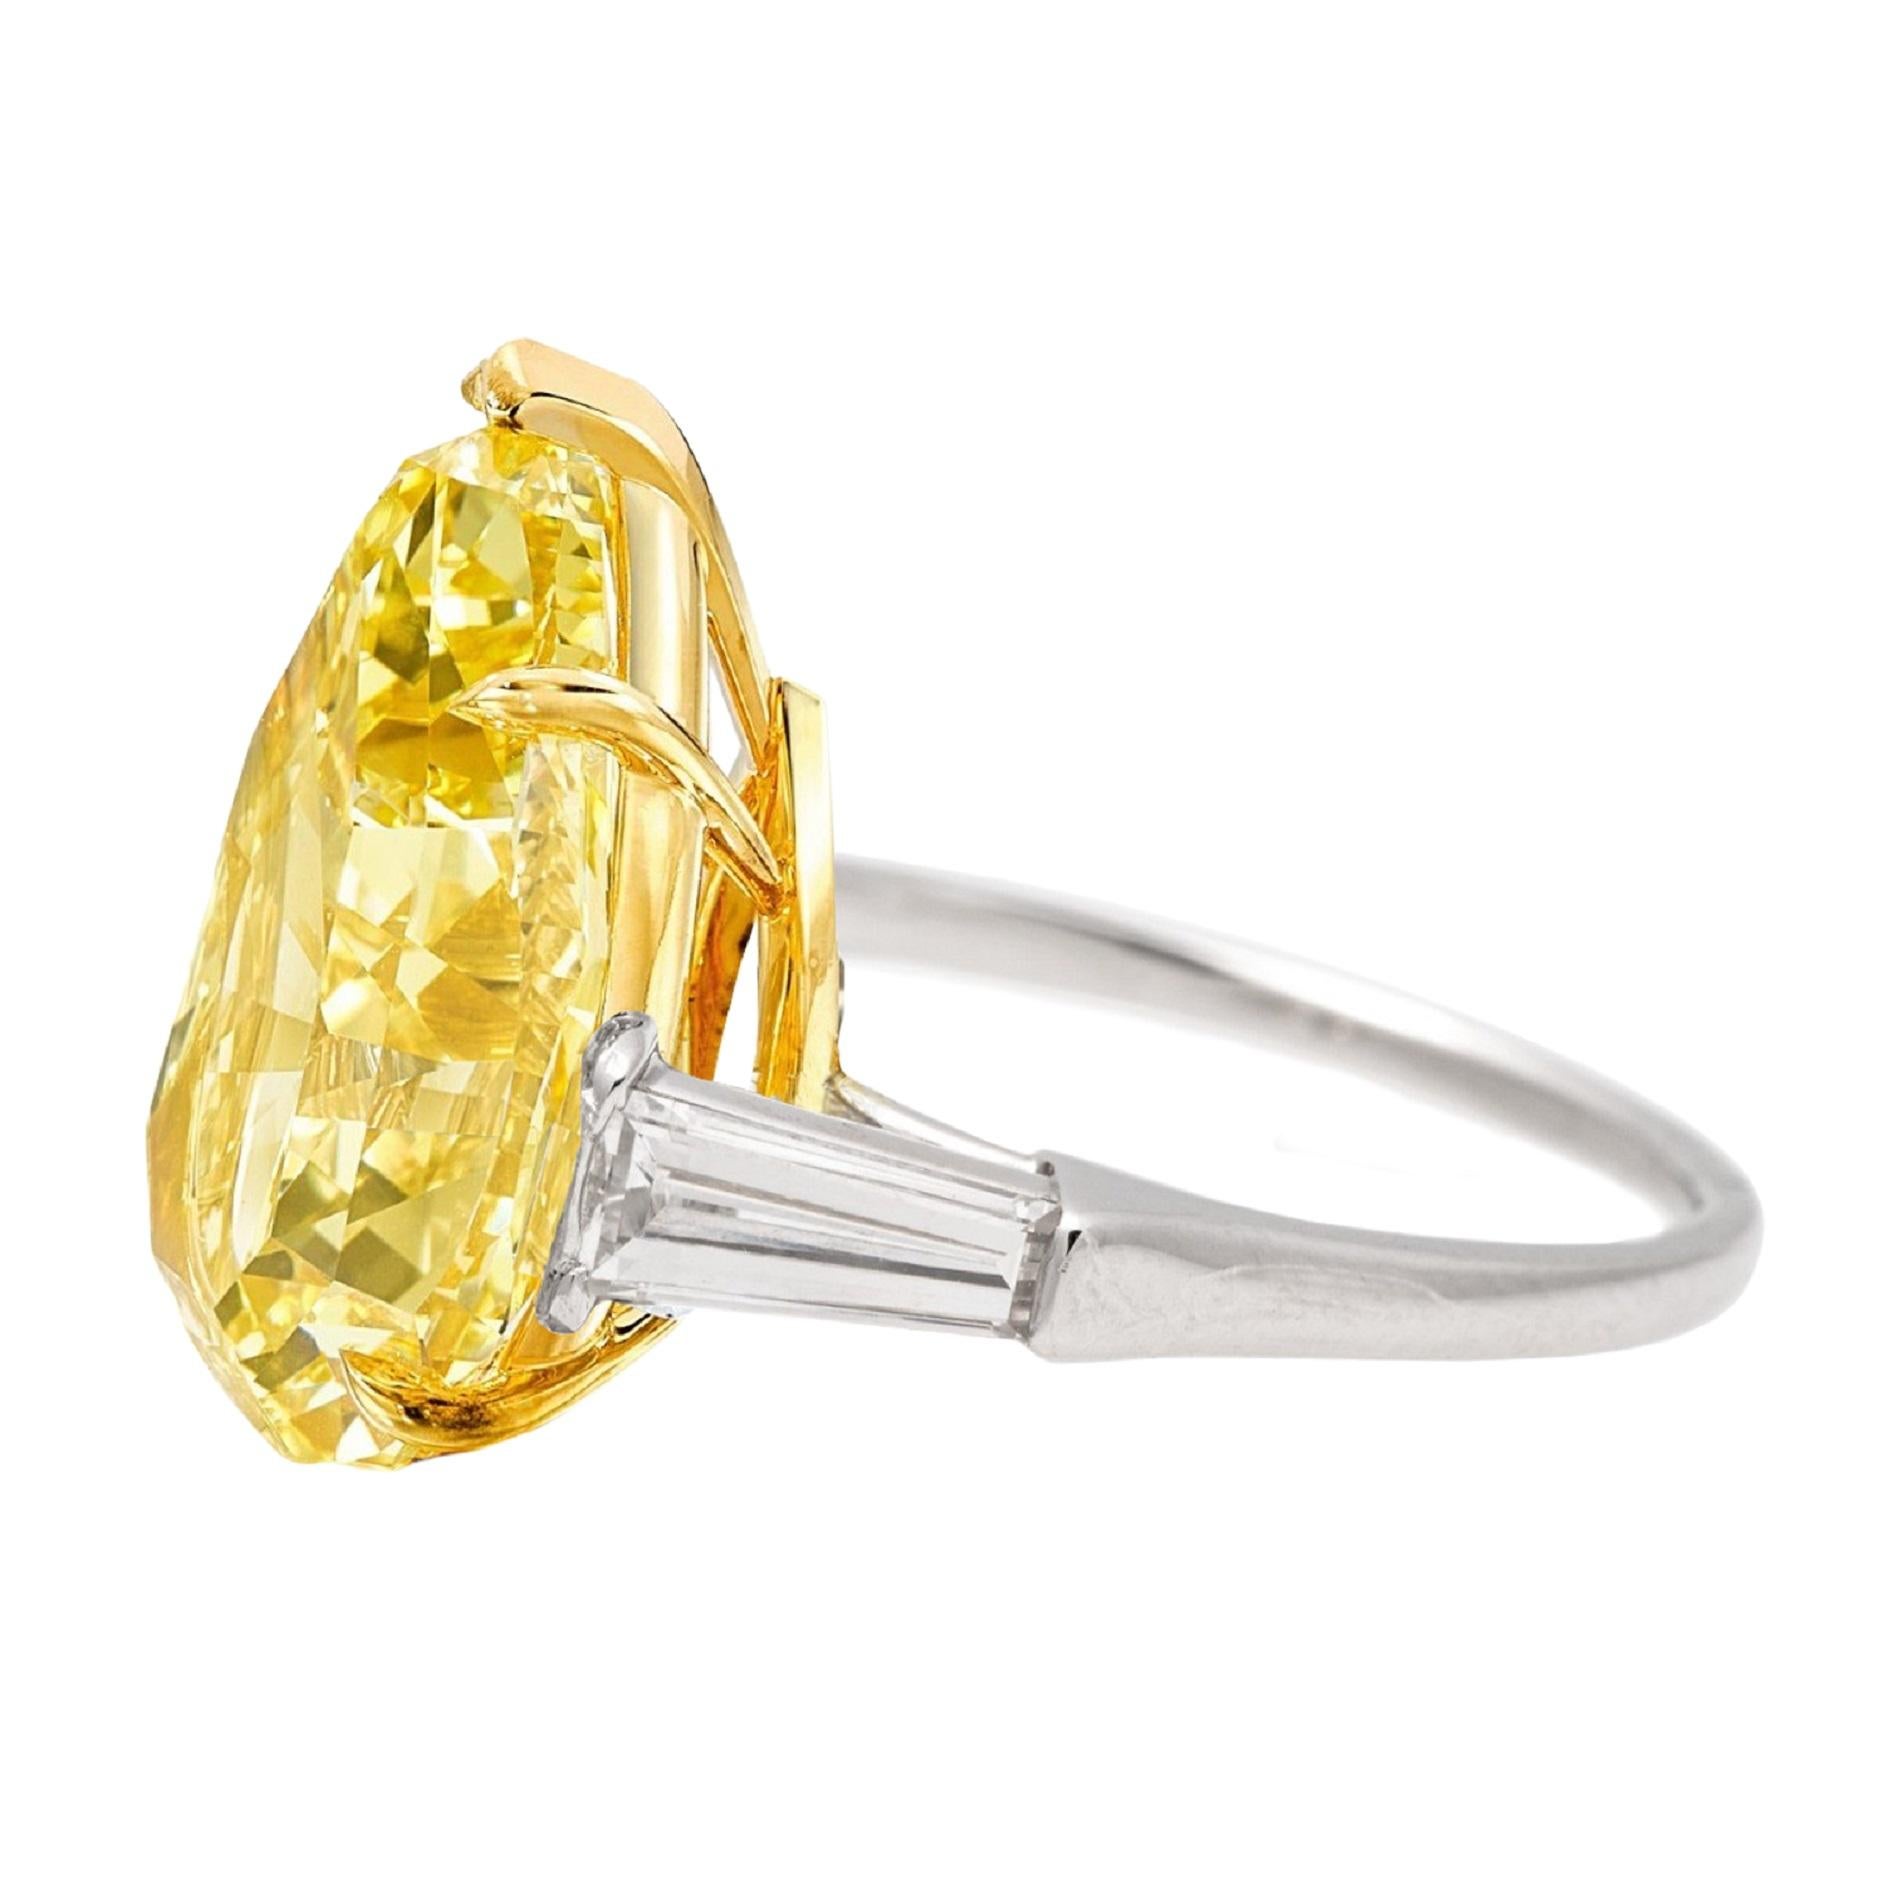 Modern GIA Certified 8.25 Carat Fancy Intense Yellow Diamond Solitaire Ring For Sale